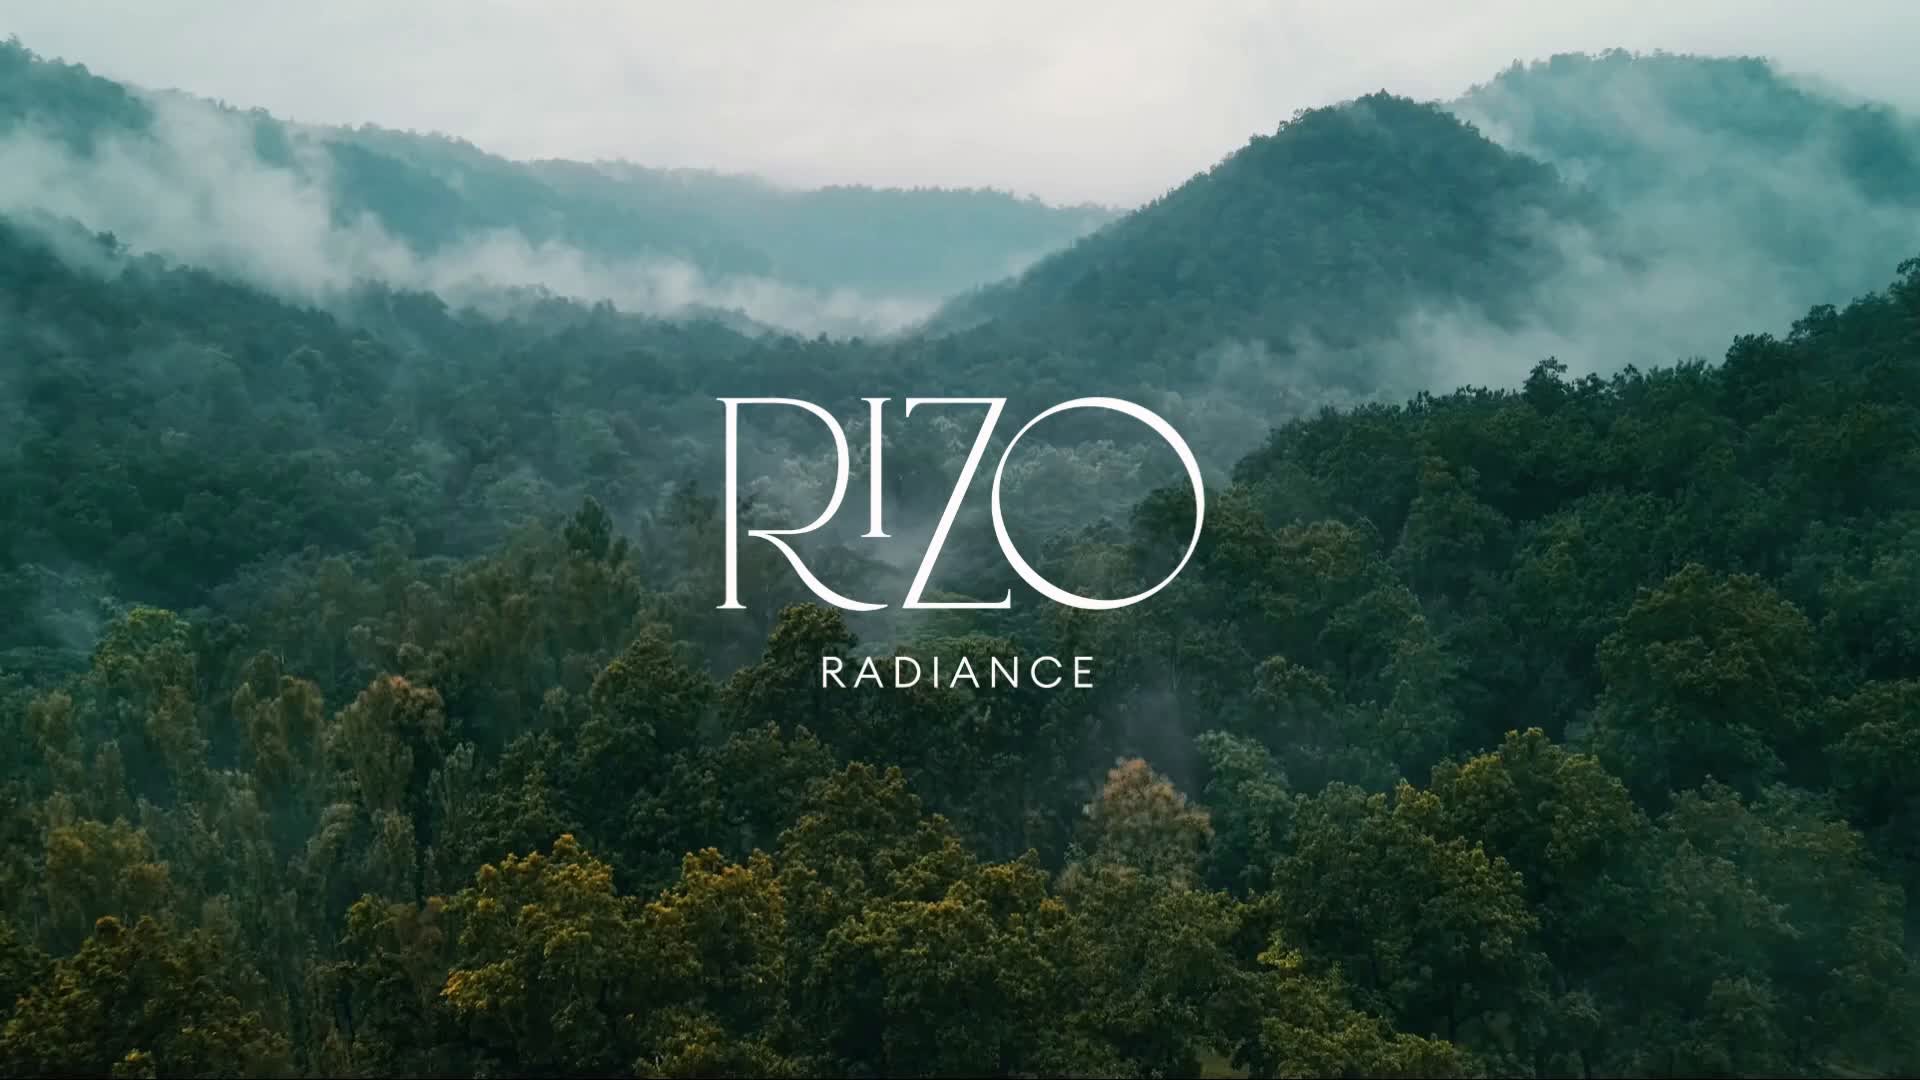 rizo radiance commercial